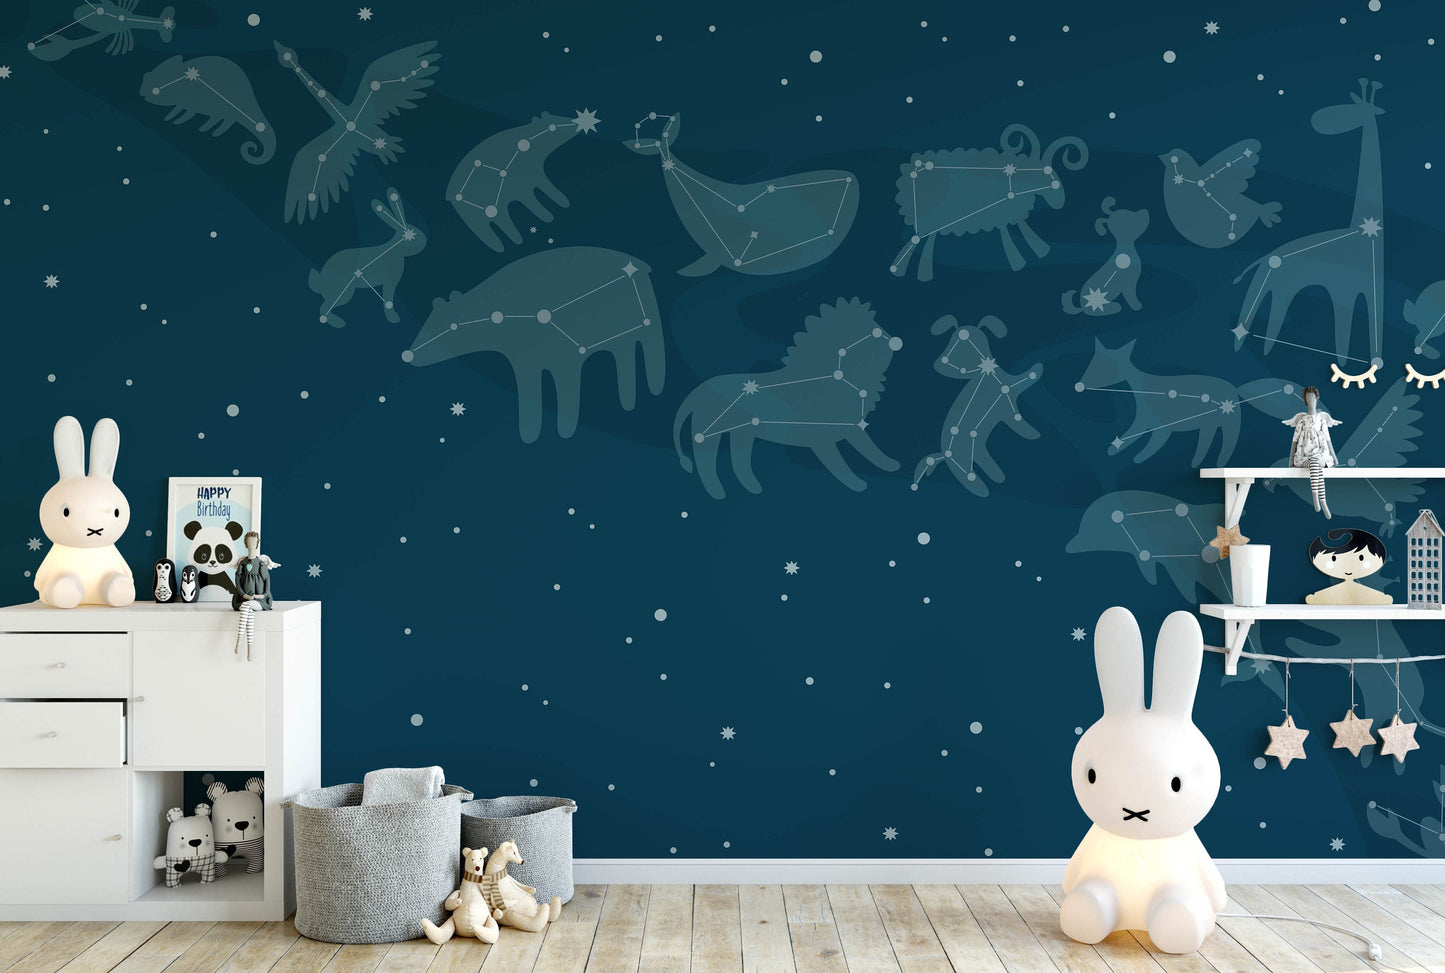 Removable Peel and Stick Wallpaper Night Sky Cosmos  constellations Wall Paper Wall Murals, KL0058